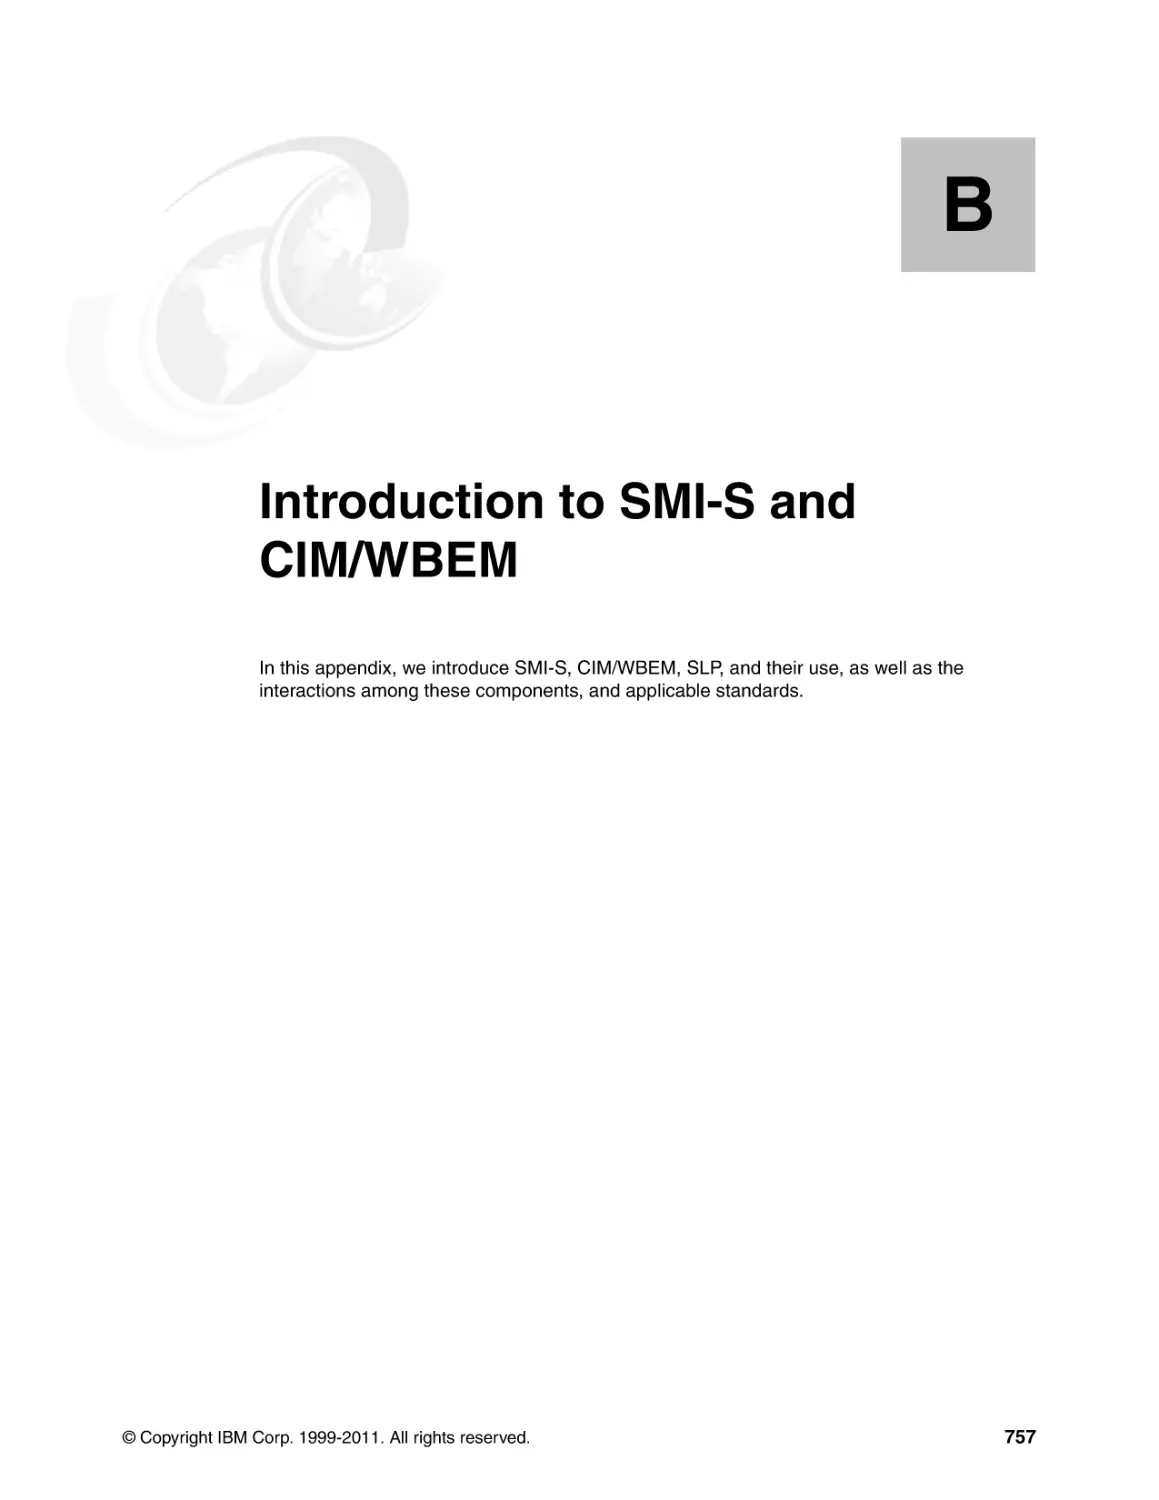 Appendix B. Introduction to SMI-S and CIM/WBEM